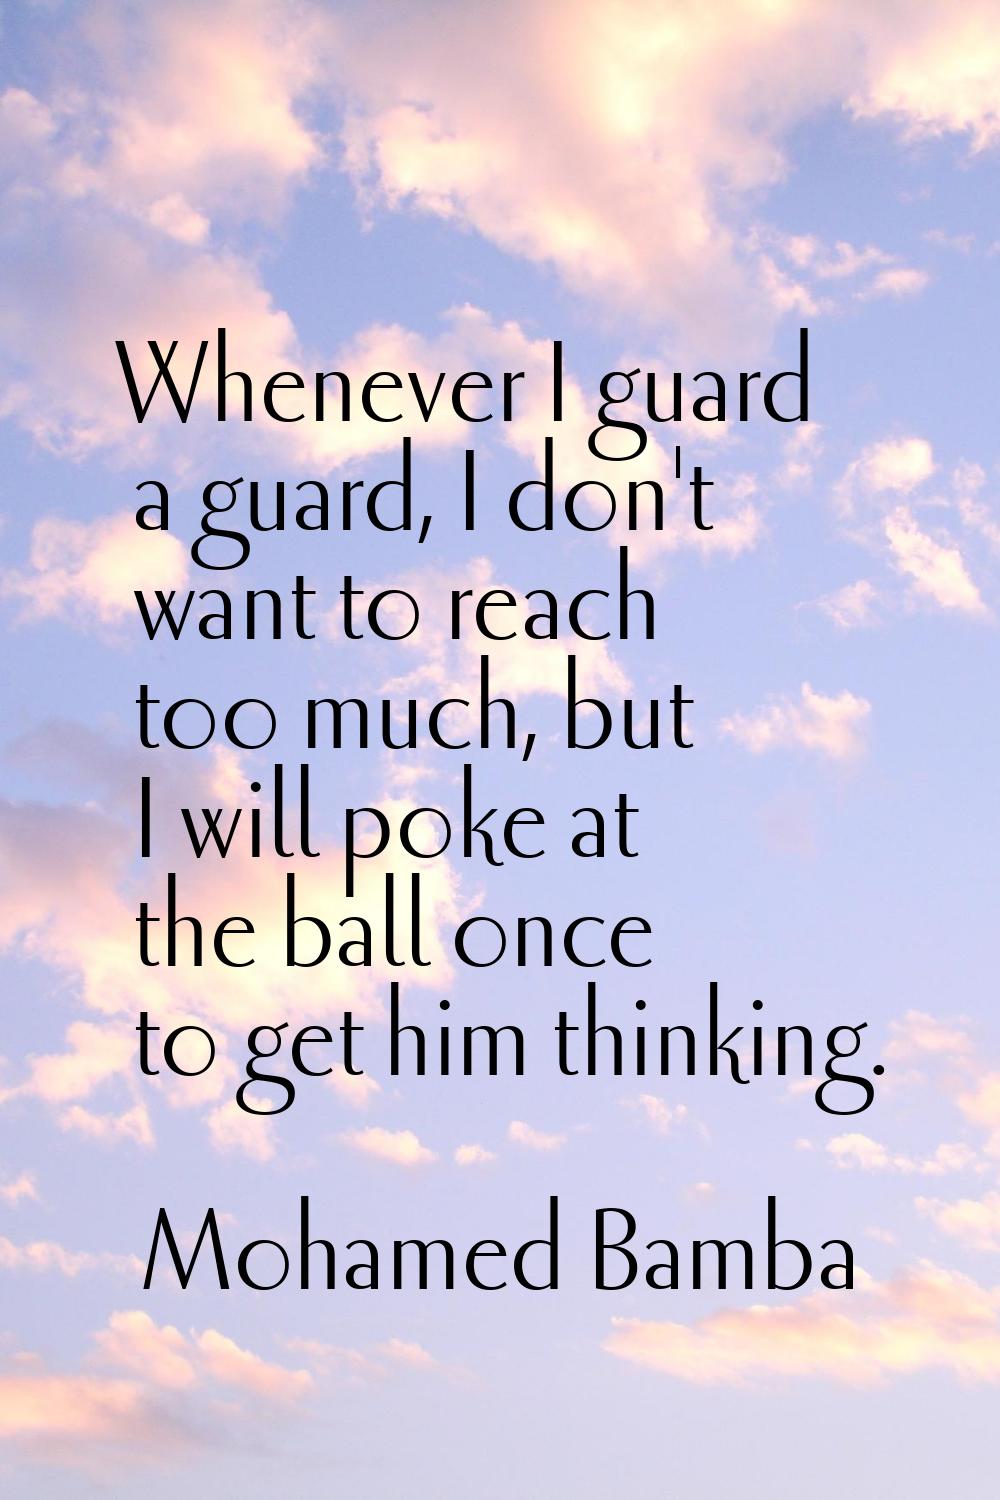 Whenever I guard a guard, I don't want to reach too much, but I will poke at the ball once to get h